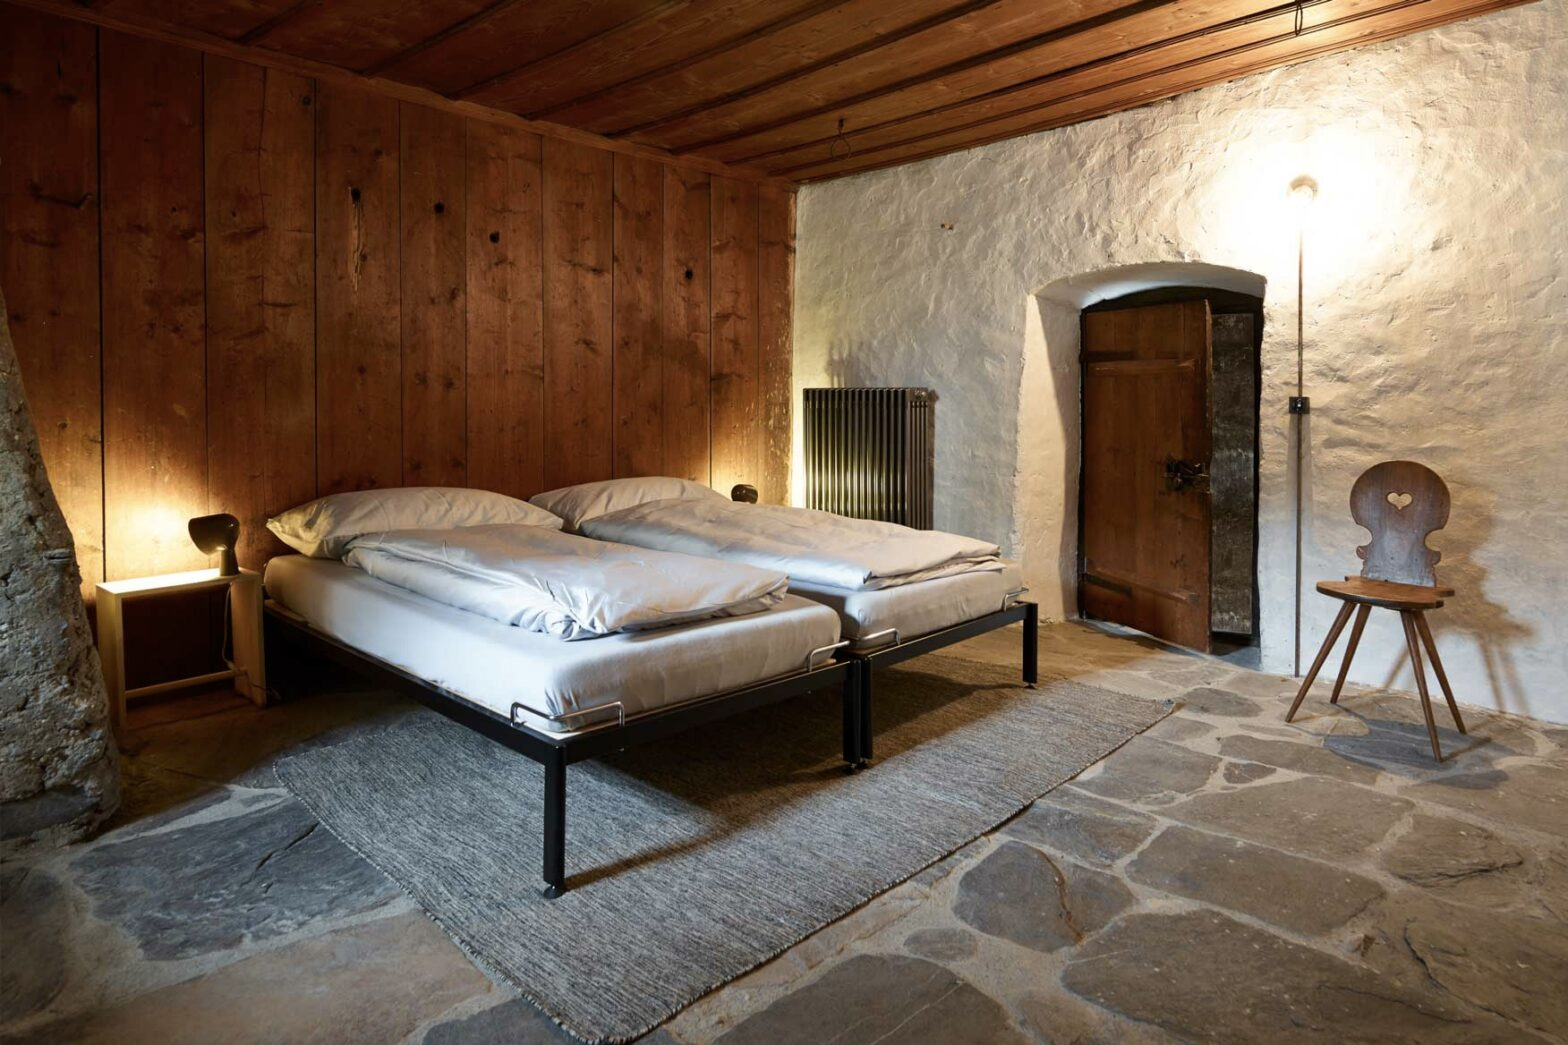 Swiss mountain retreat Türalihus whisks guests back through the centuries